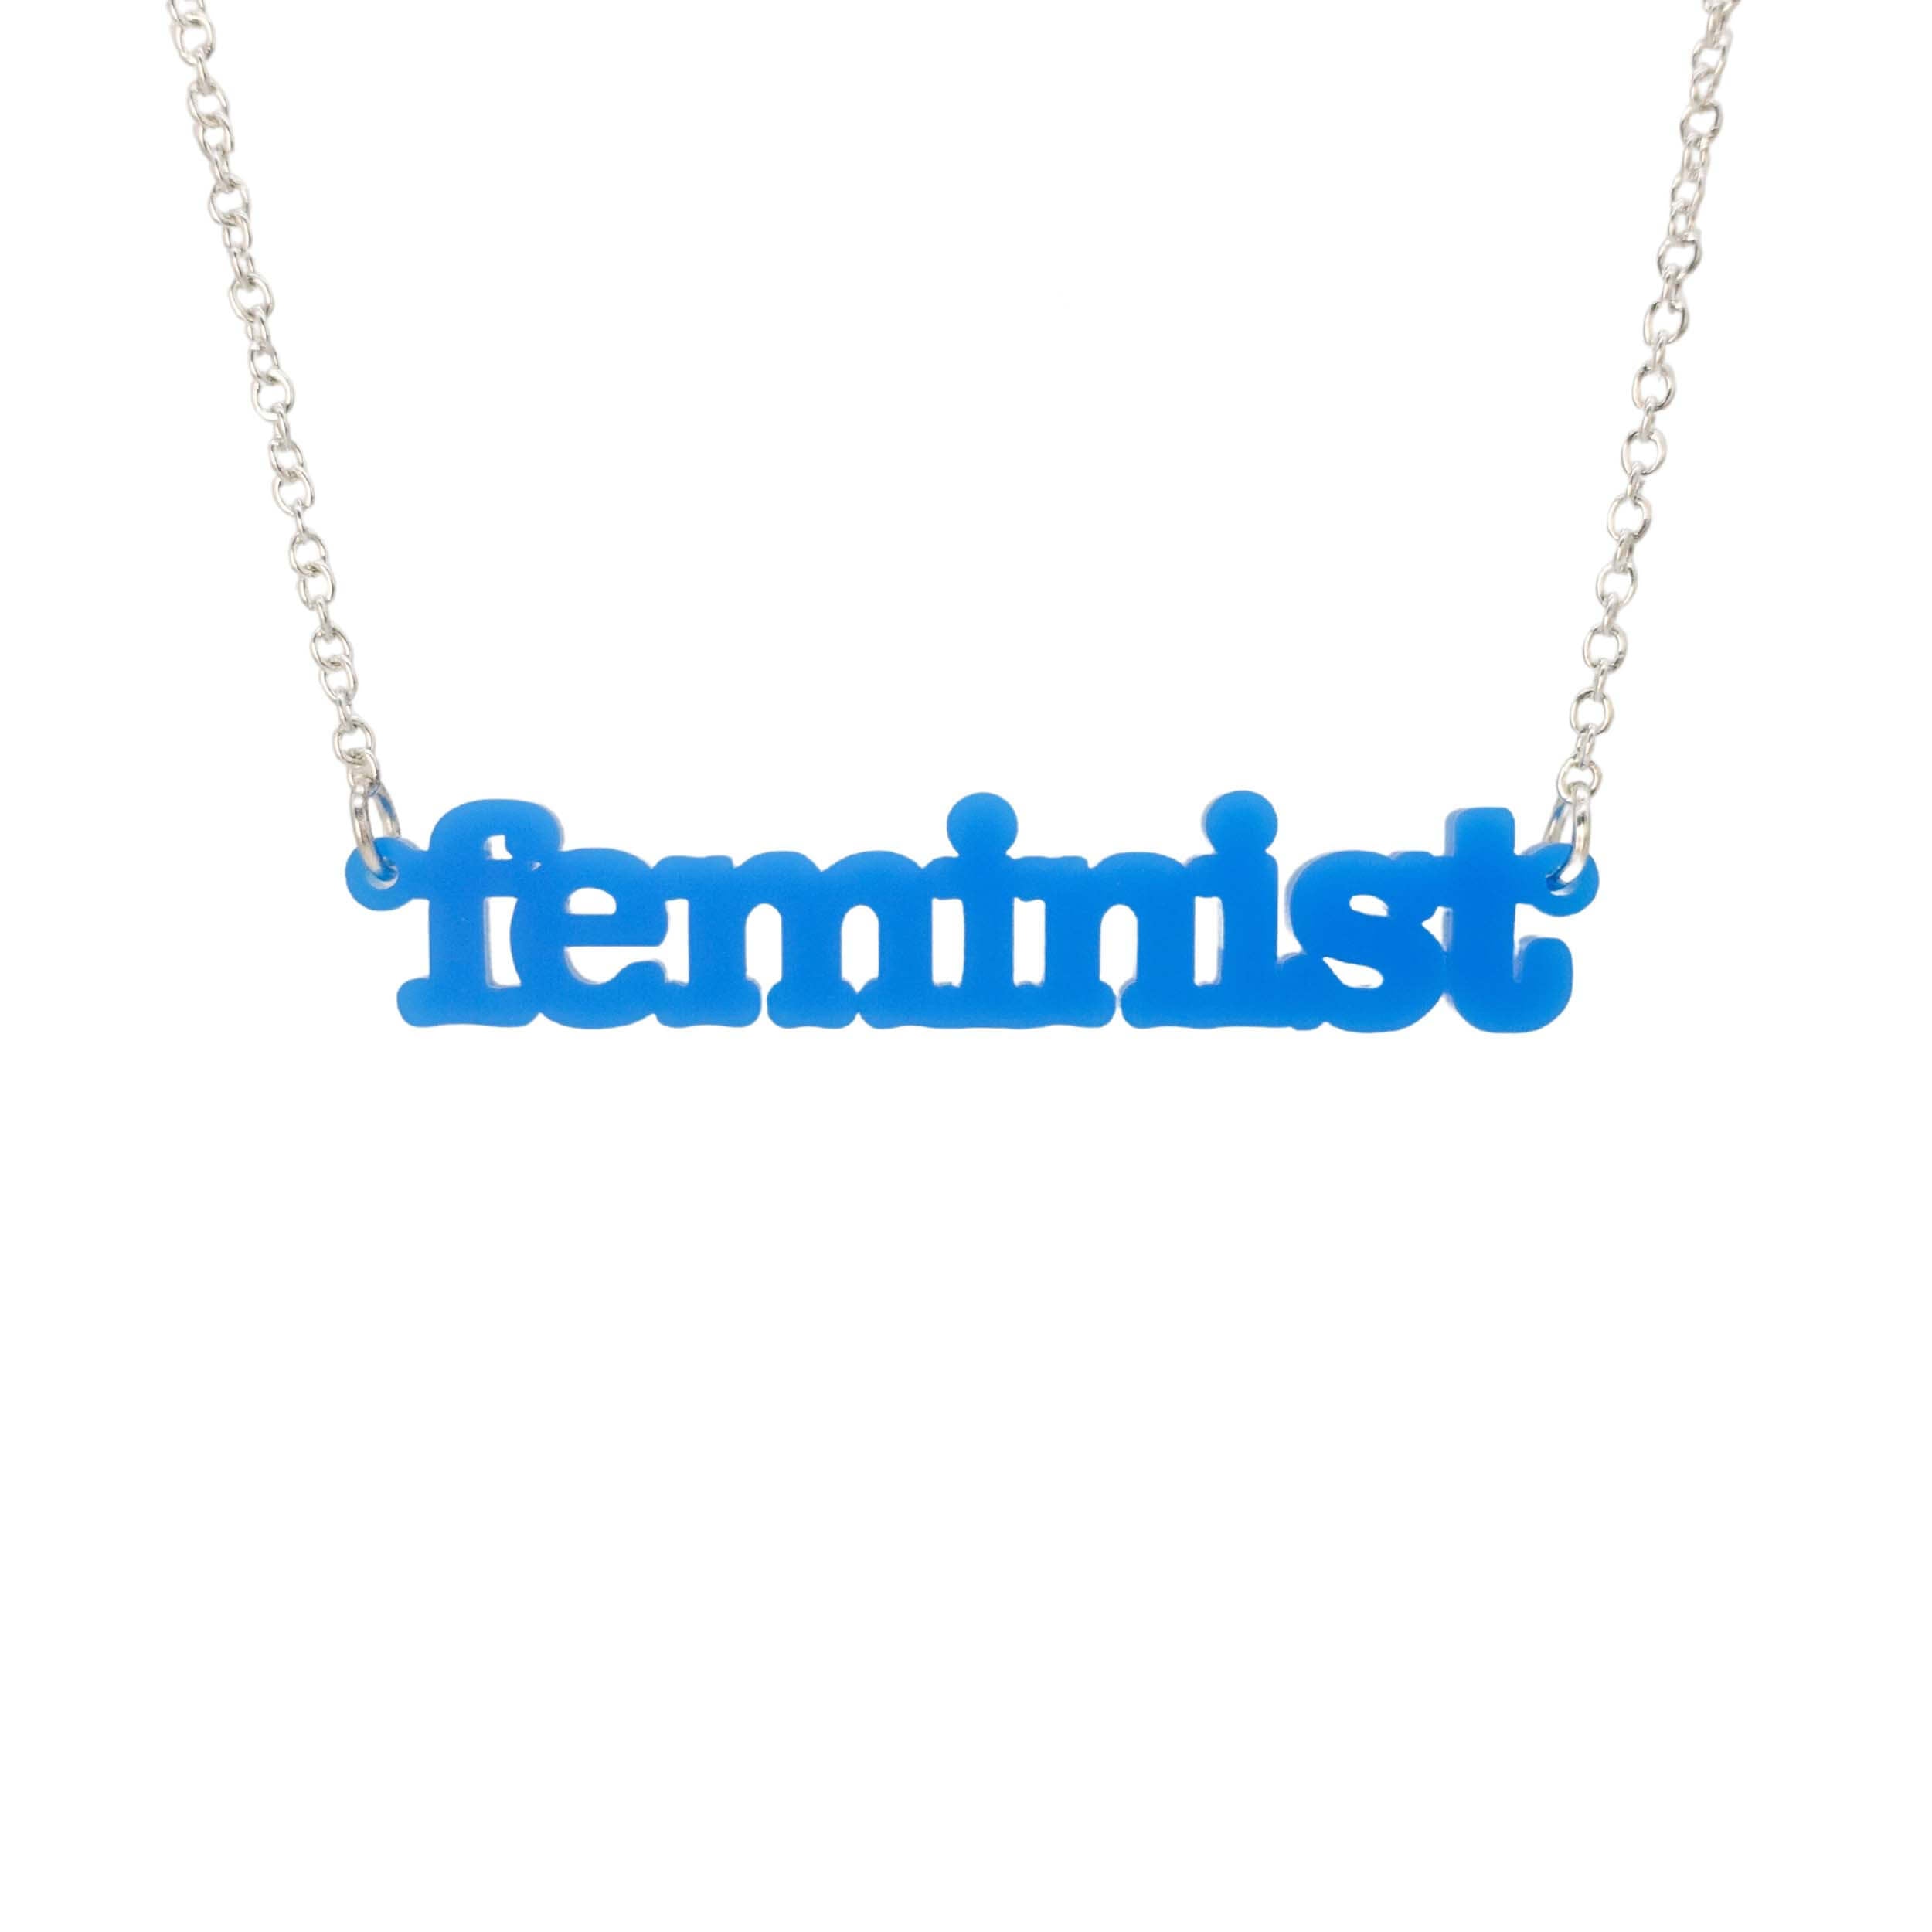 Bright blue Feminist necklace shown hanging on a white background. 